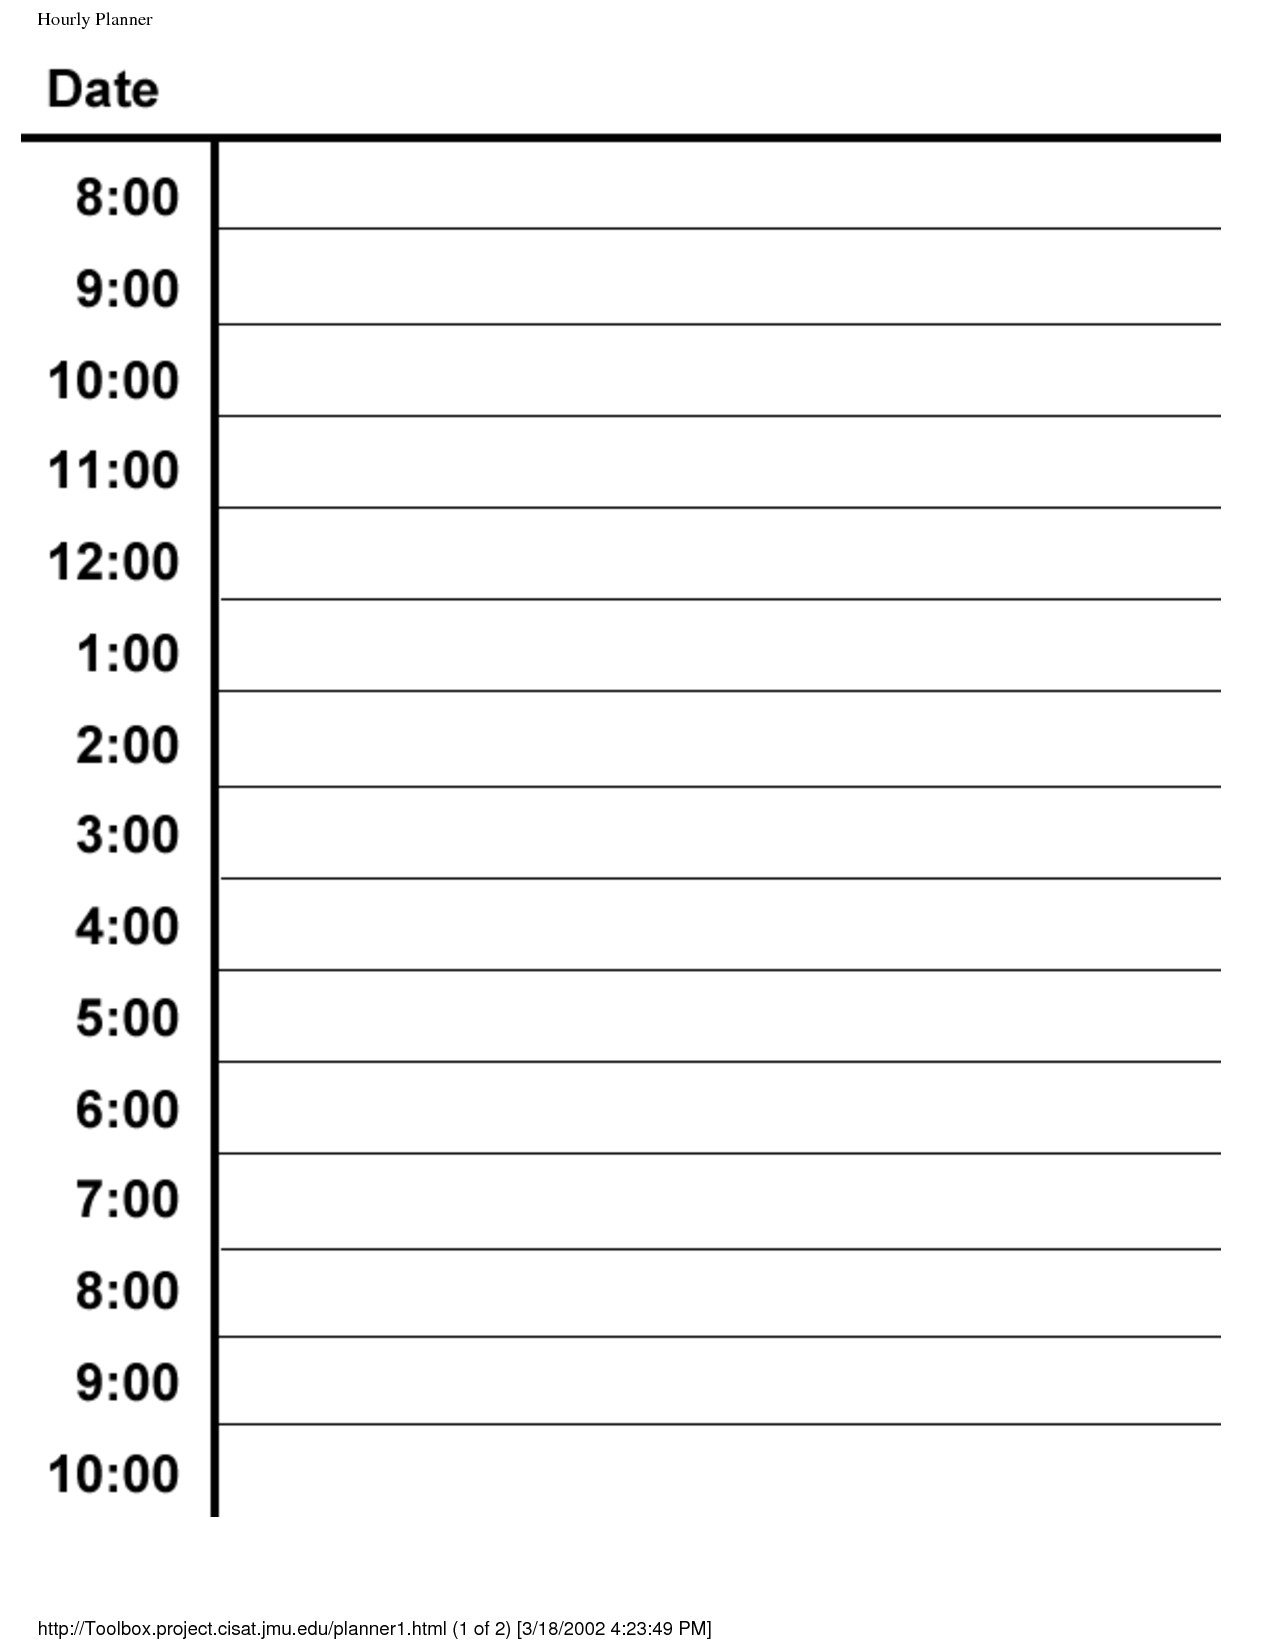 9 best images of hourly day planner printable hourly